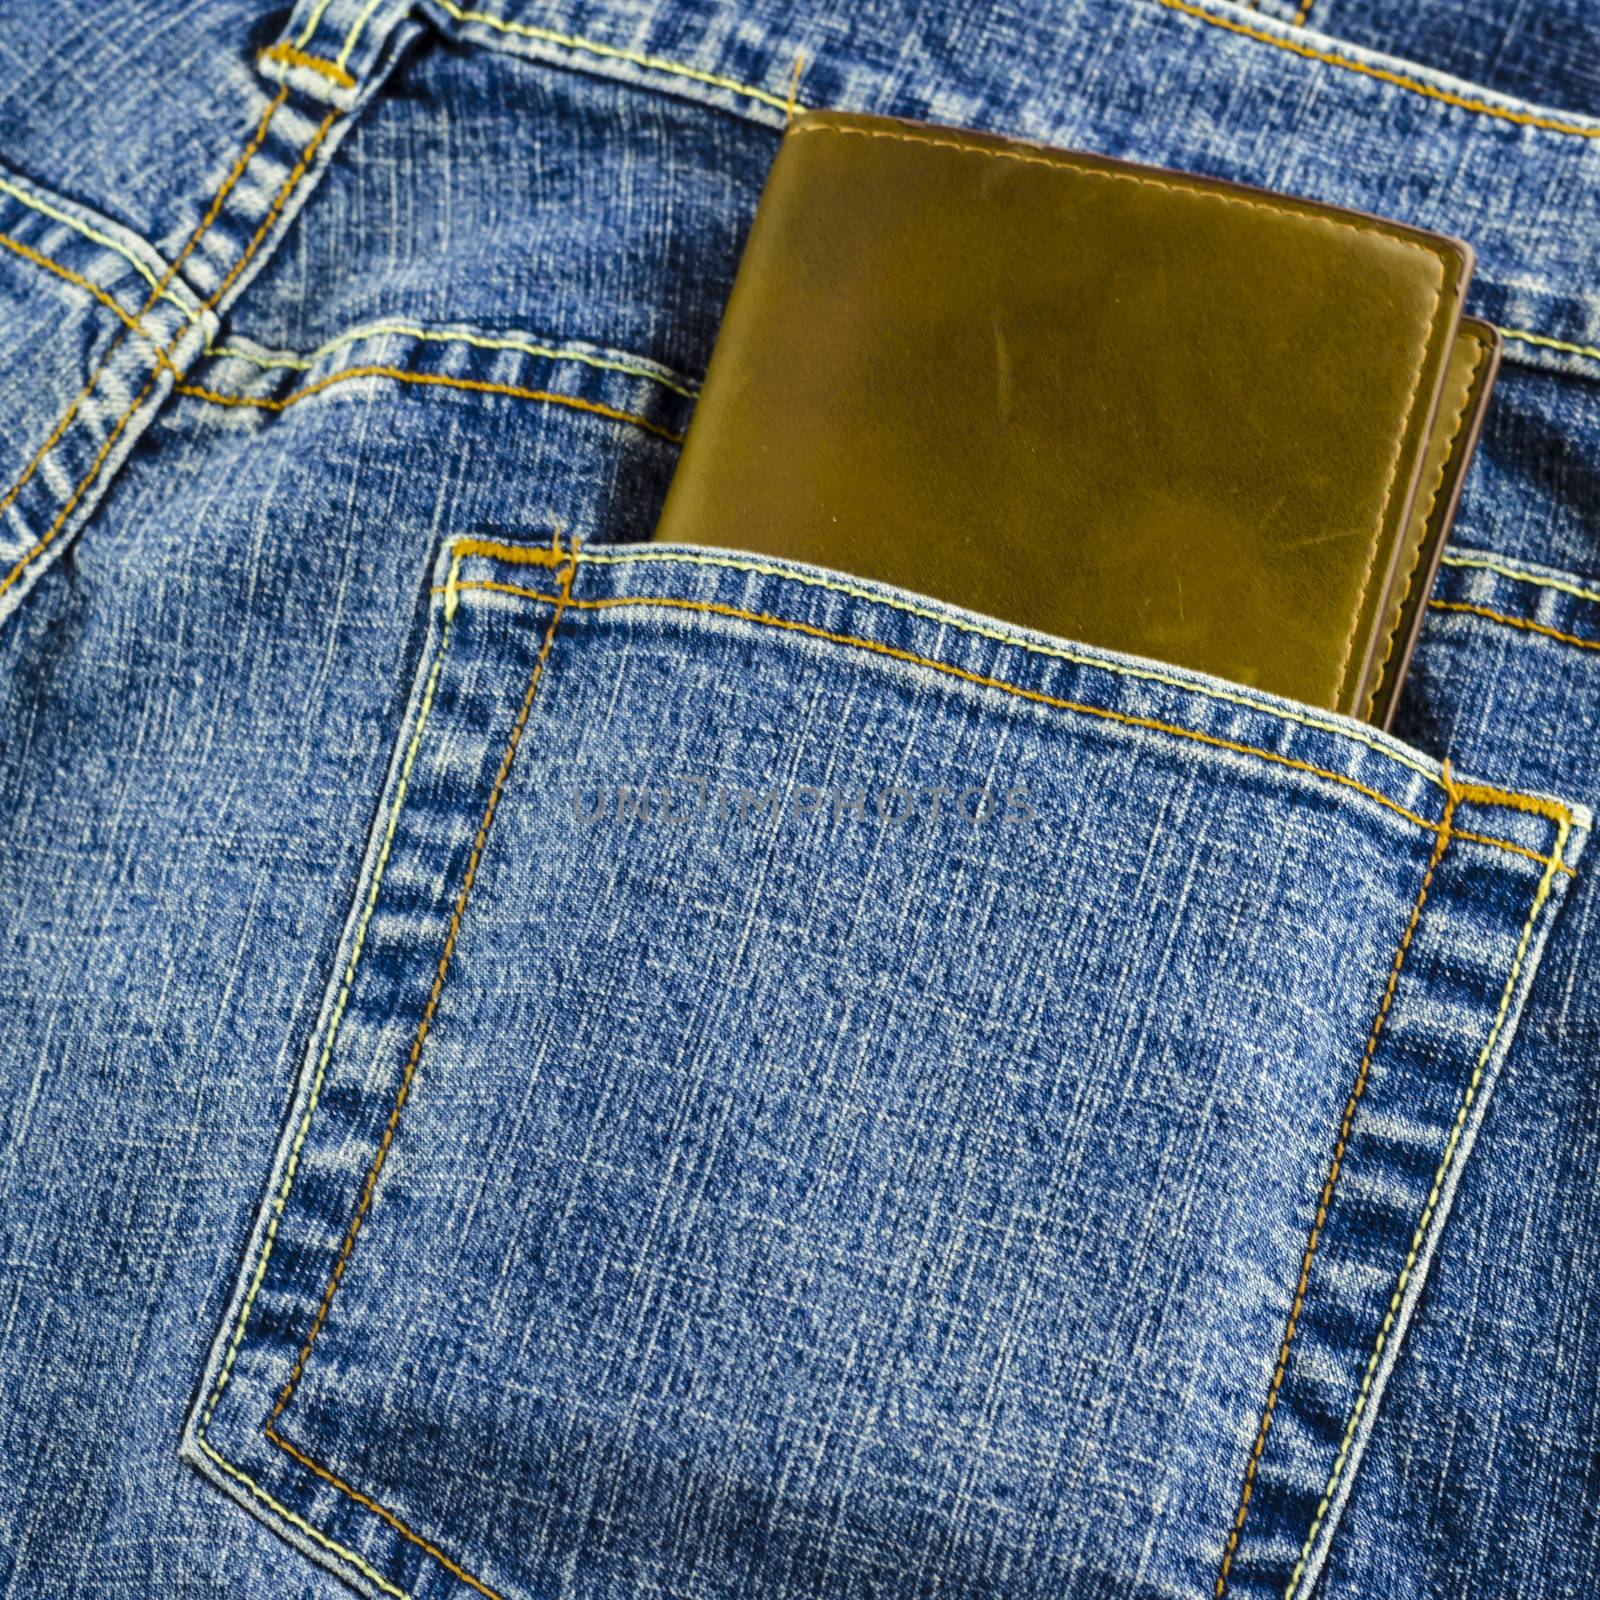 blue jeans pocket with brown wallet